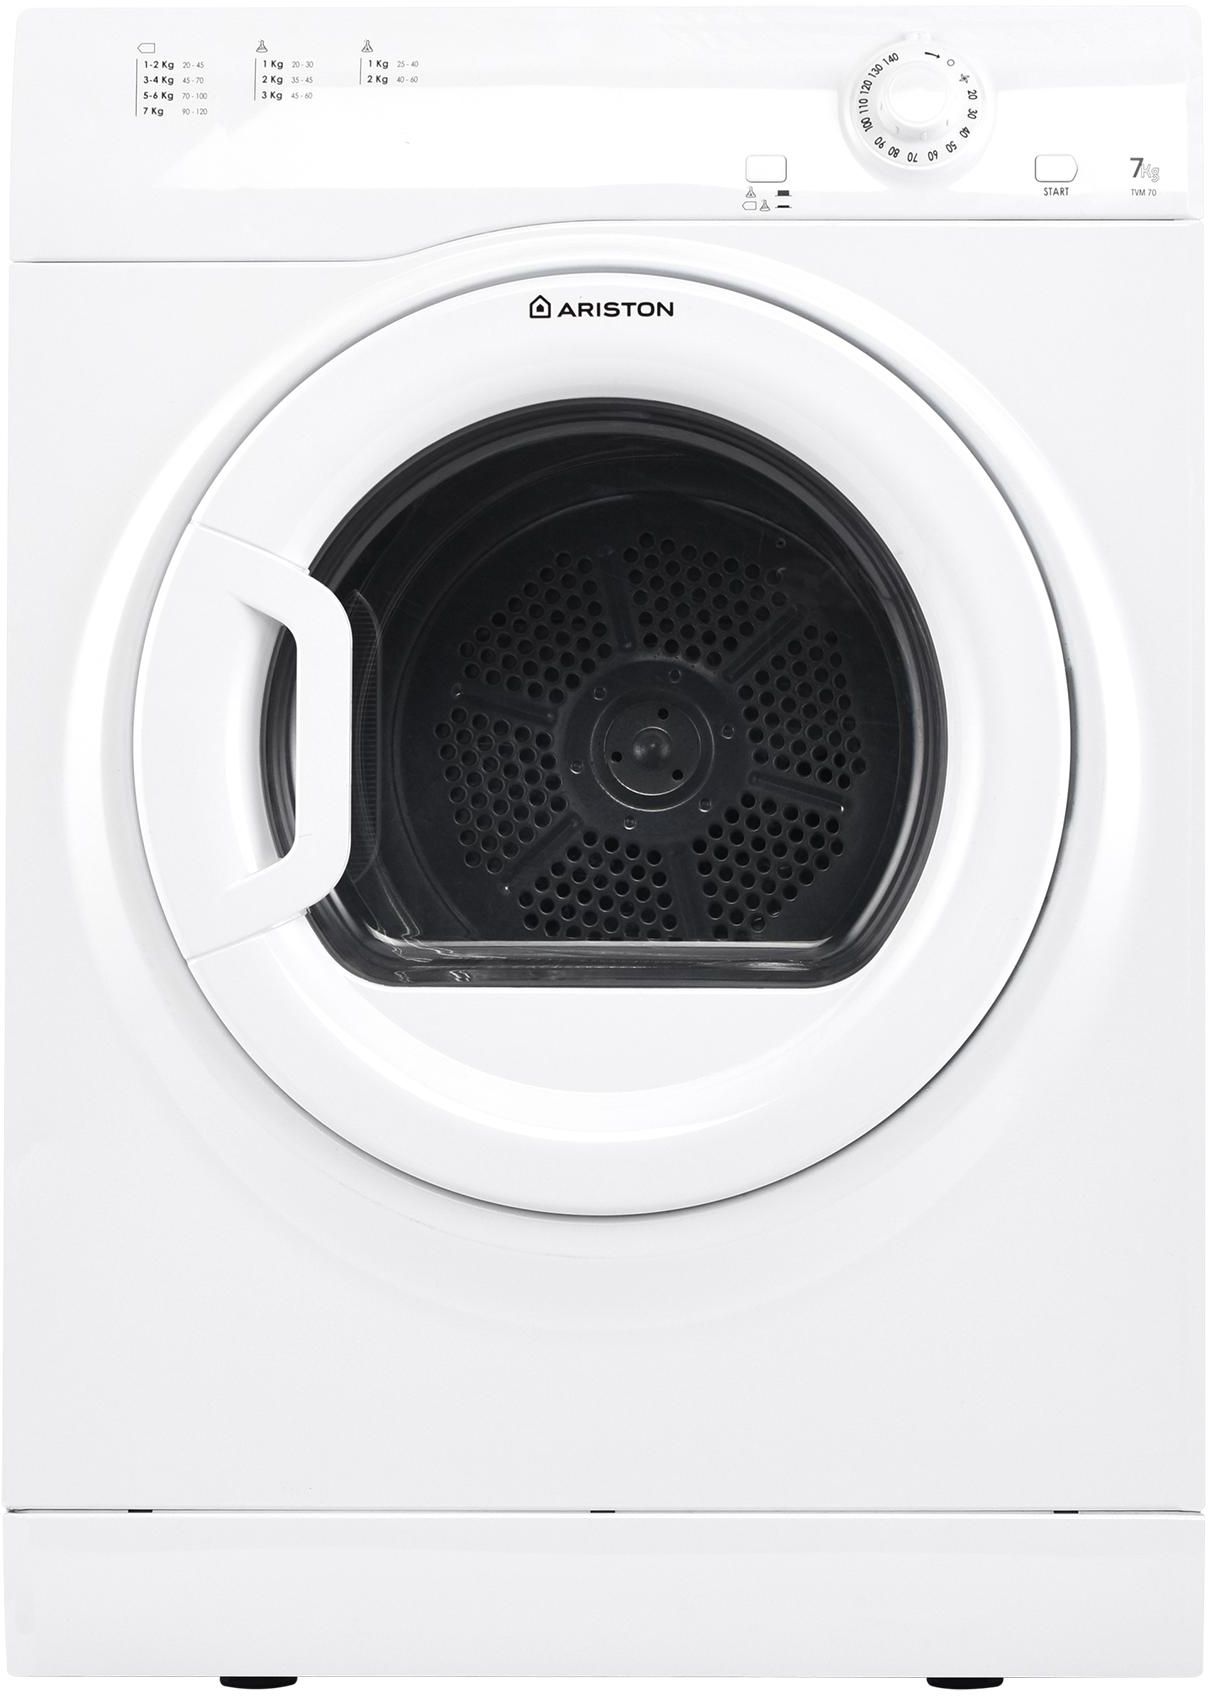 Ariston Tumble Dryer, 7kg, Air Vented, Steel Tub, 3 Special Drying Programs, White